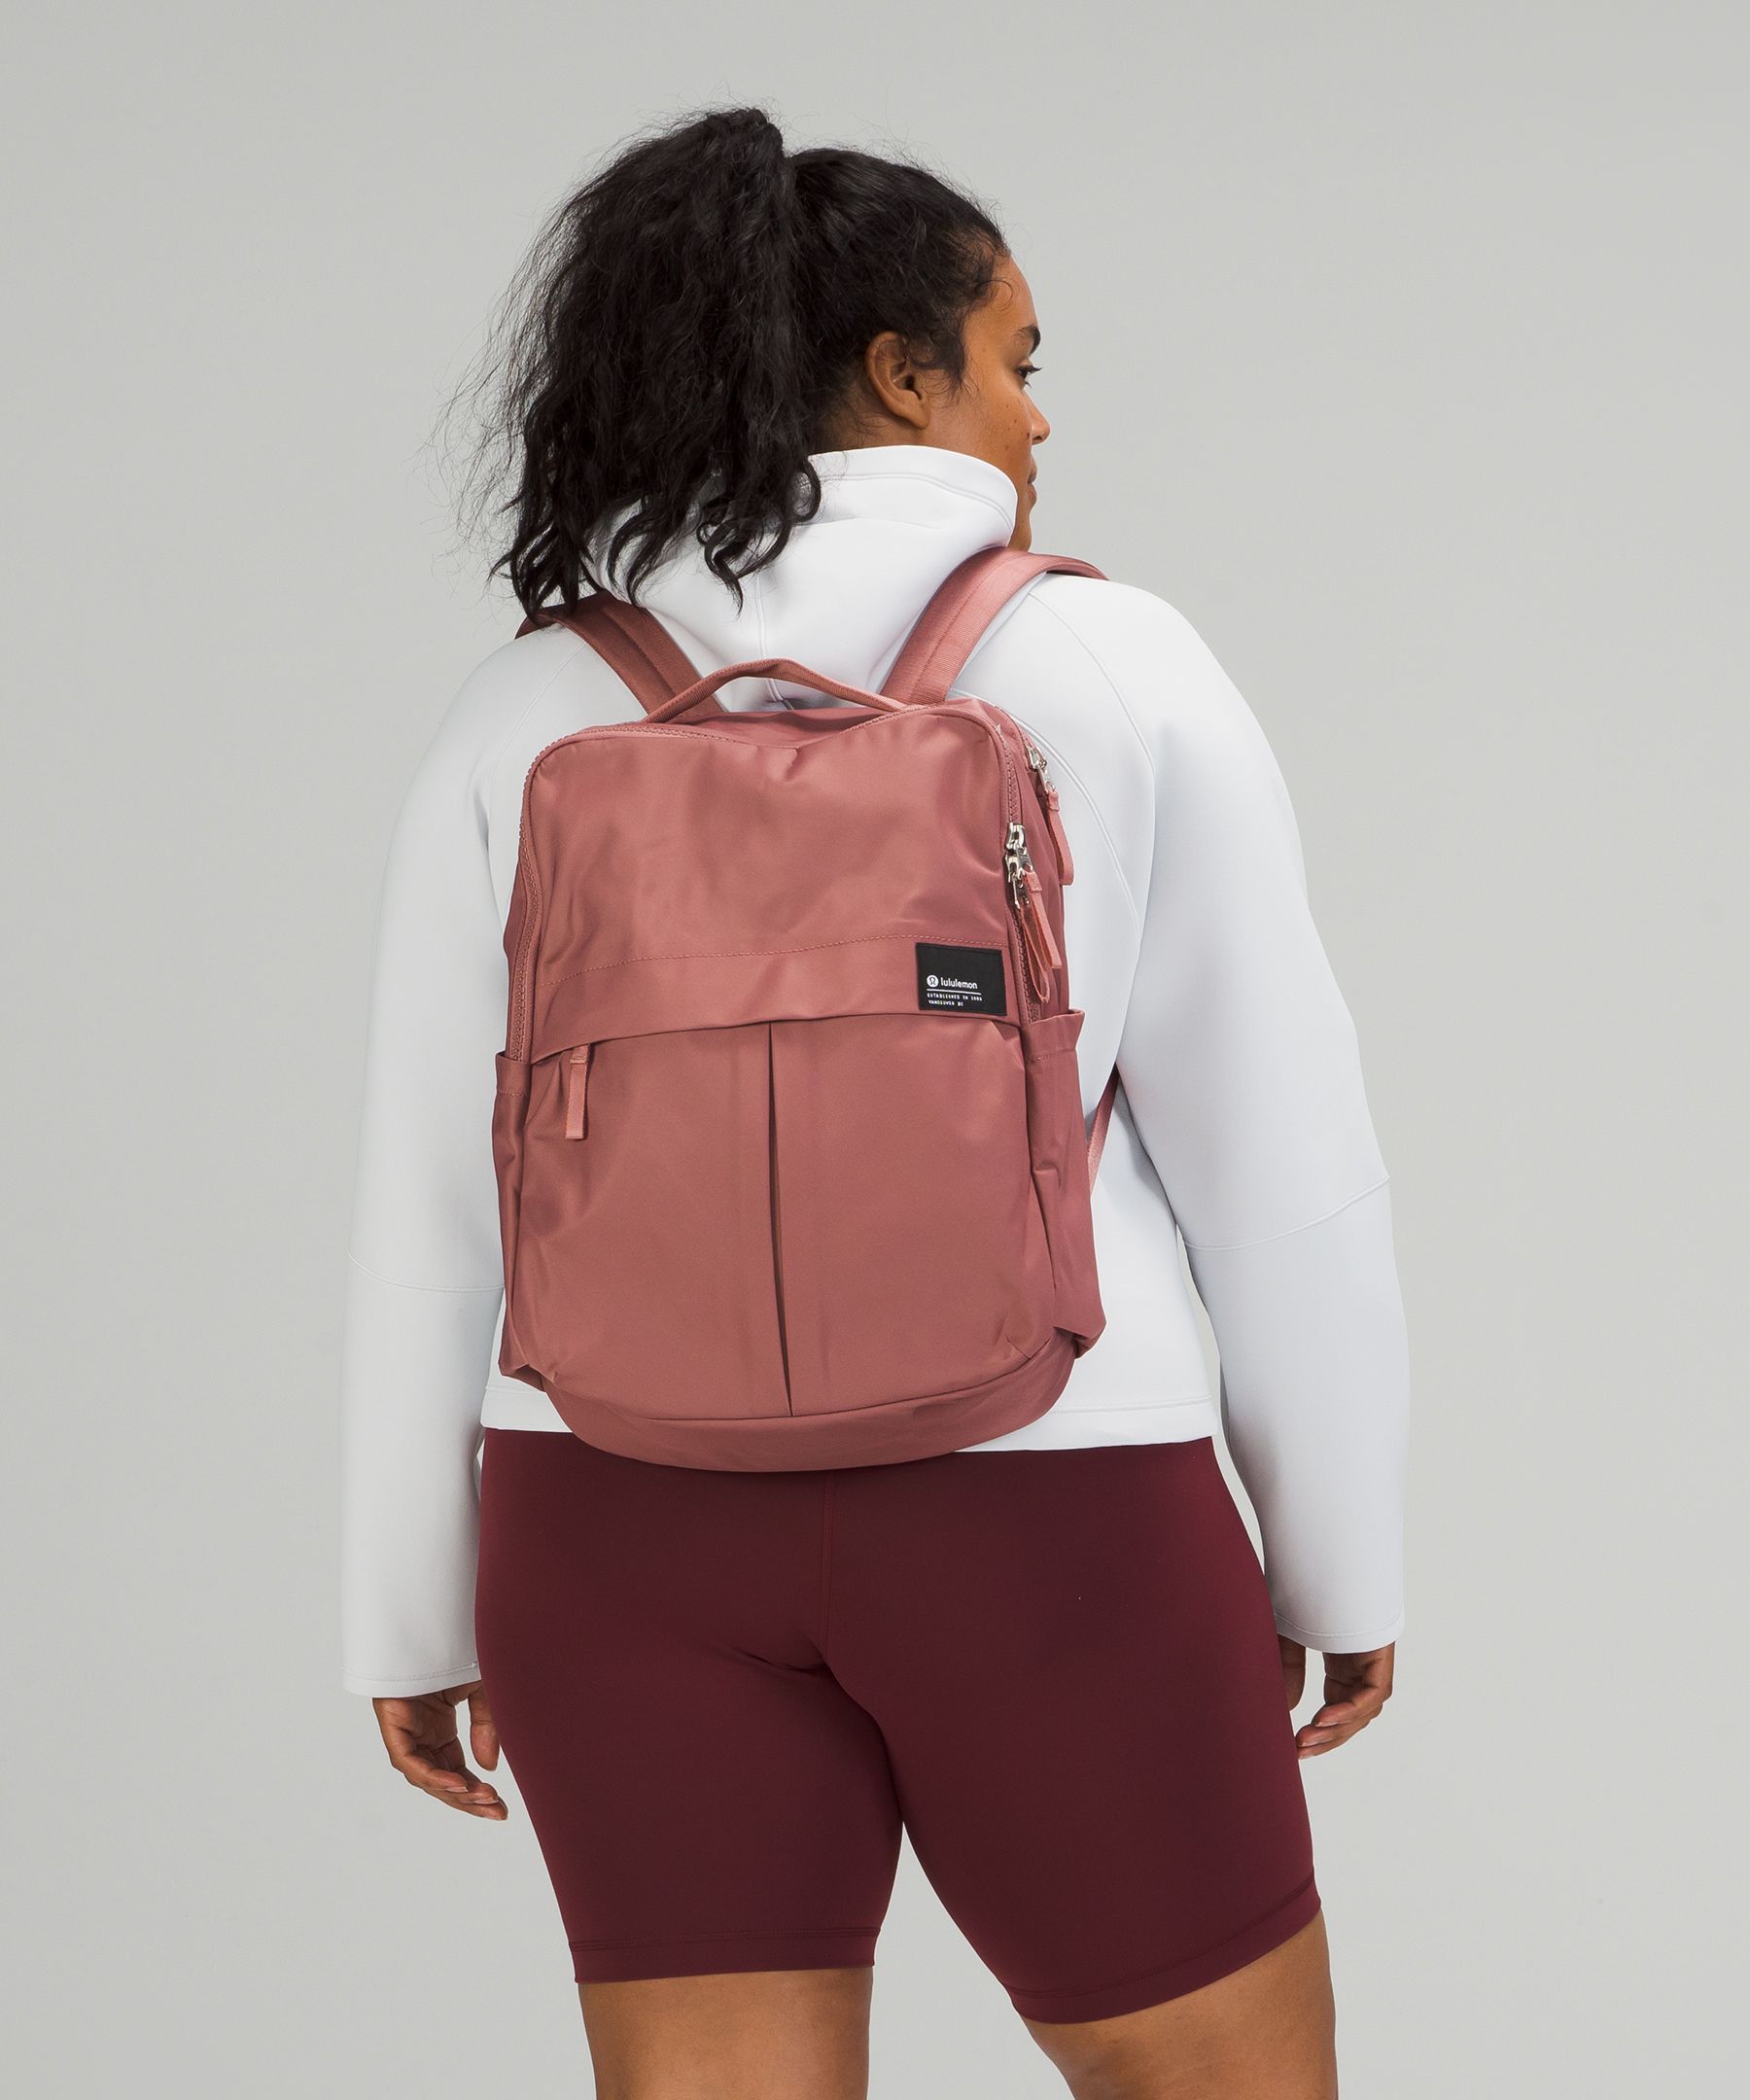 Lululemon On The Move Everyday Backpack Review | International